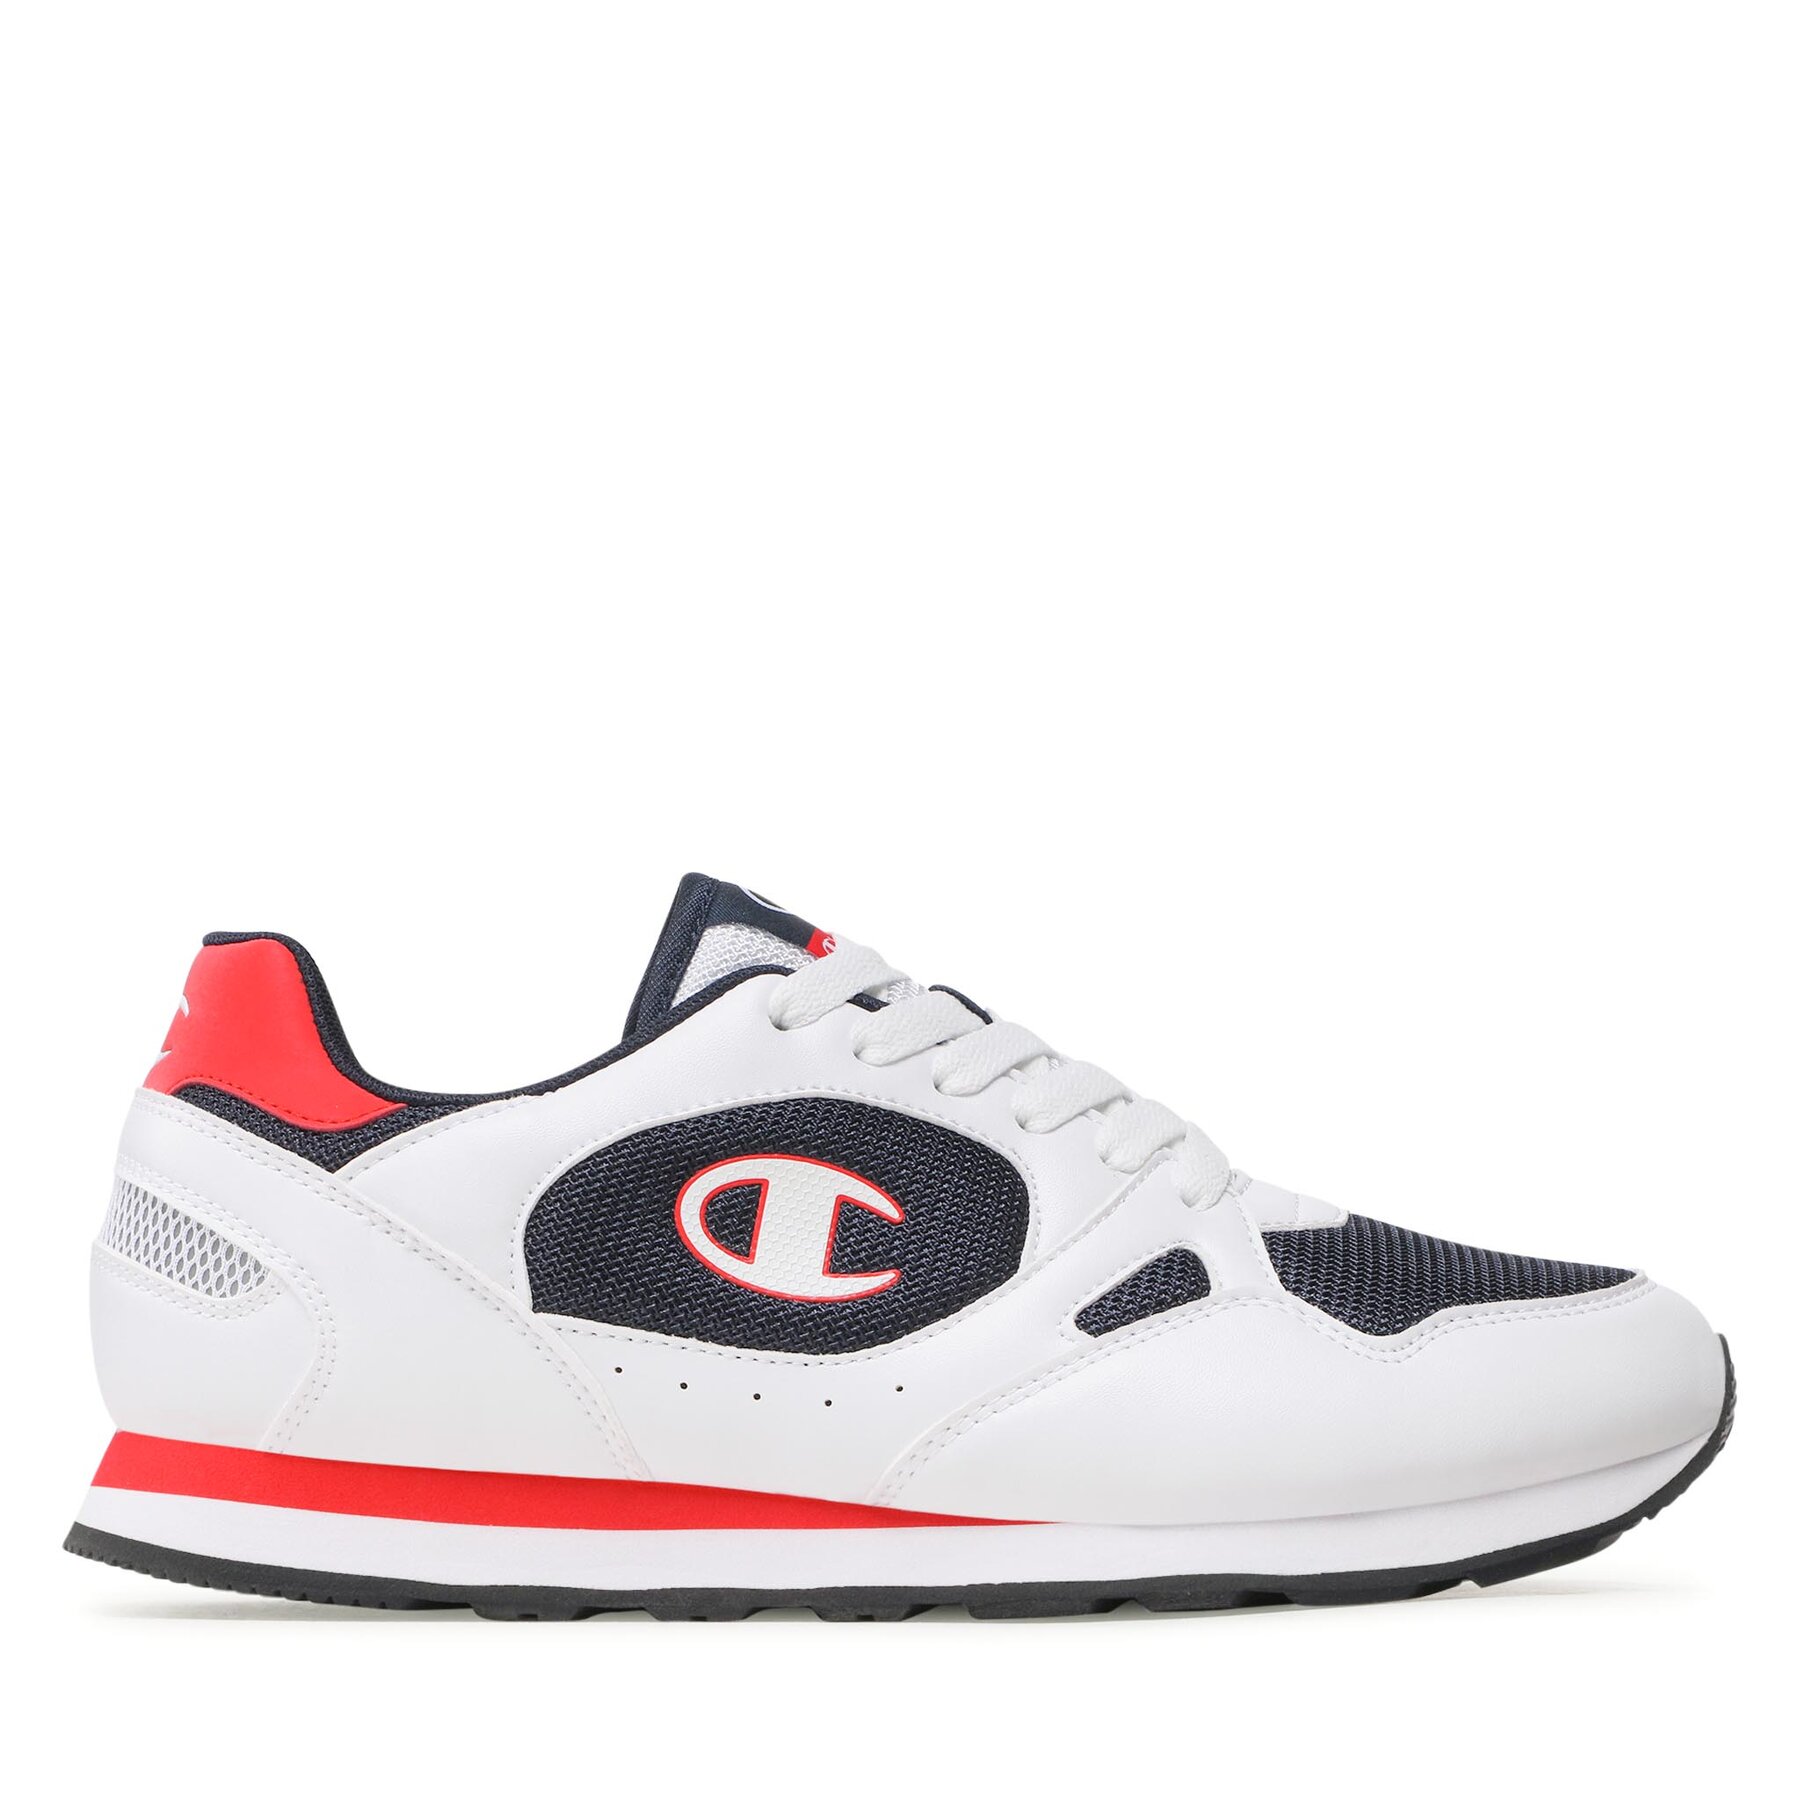 Tenisice Champion Rr Champ Mix S21927-CHA-BS501 Nny/Wht/Red